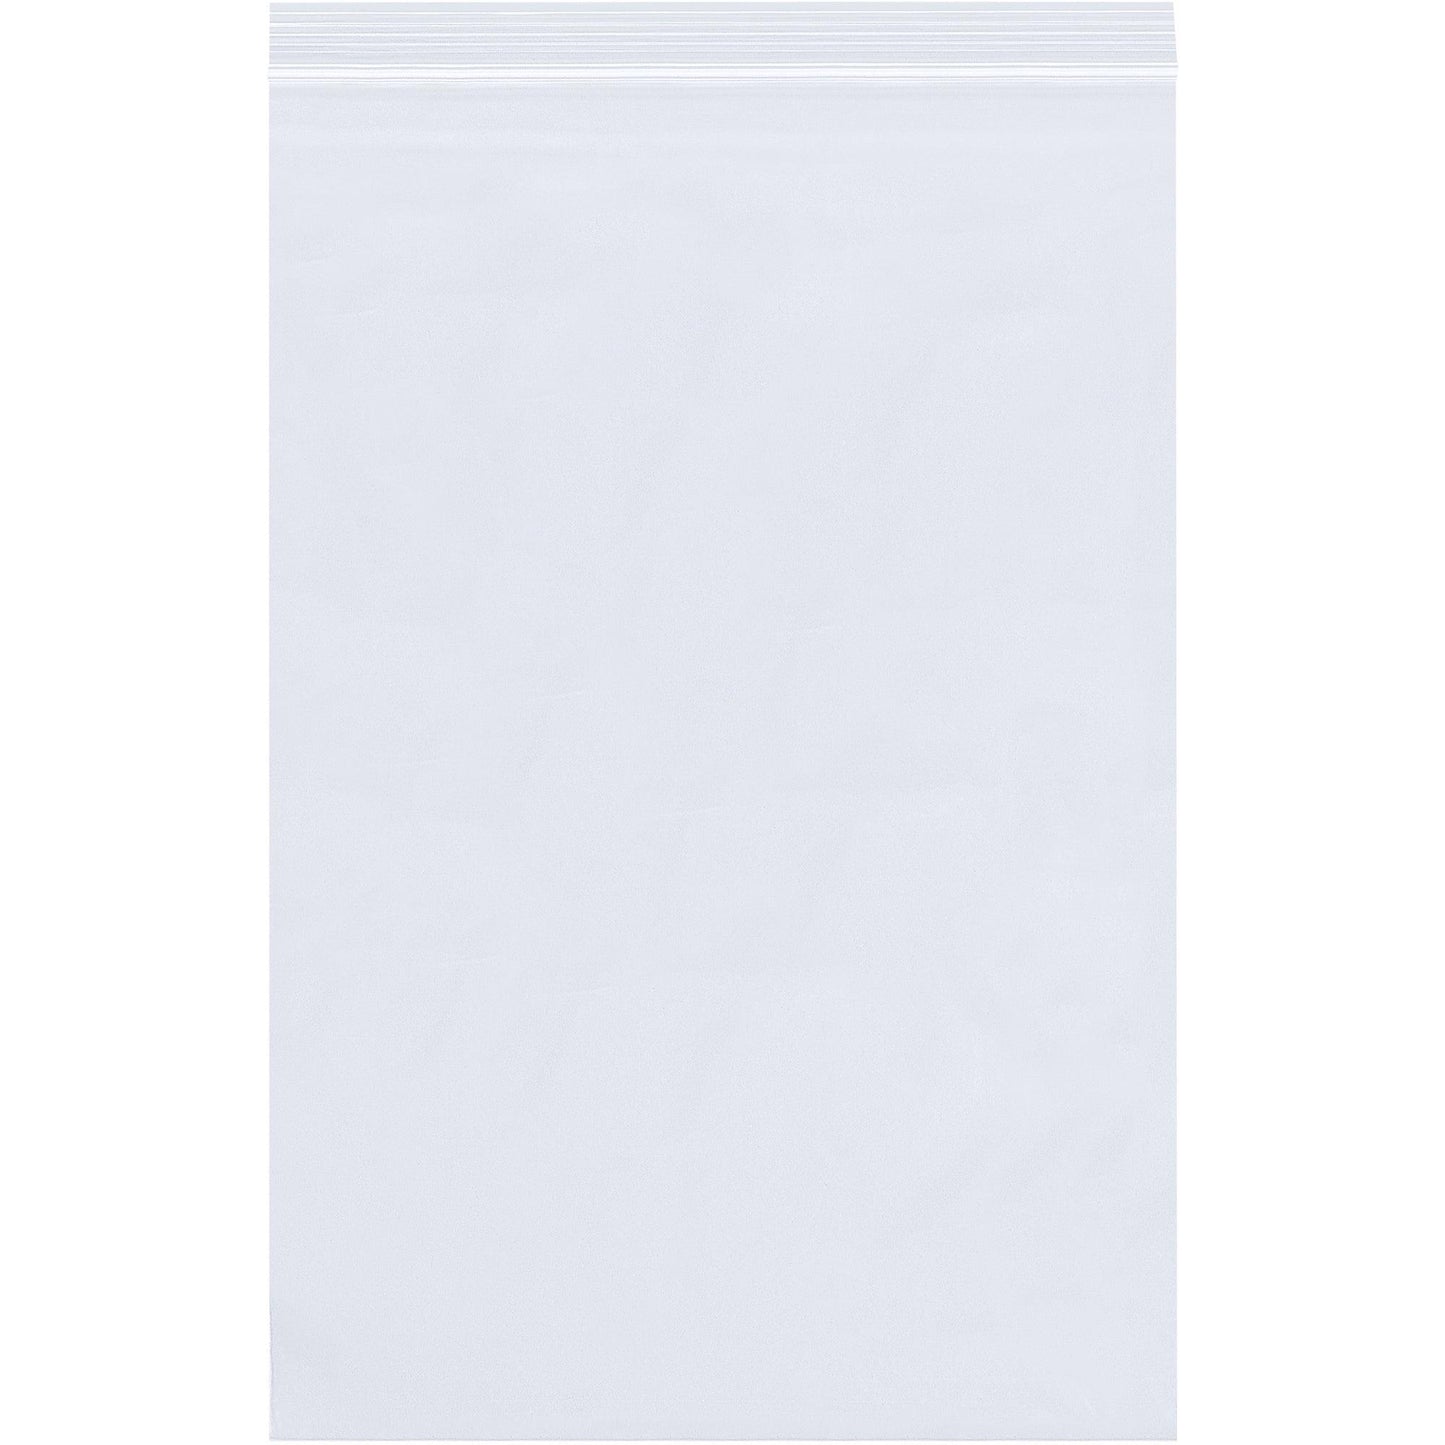 24 x 30" - 4 Mil Reclosable Poly Bags - PB3843